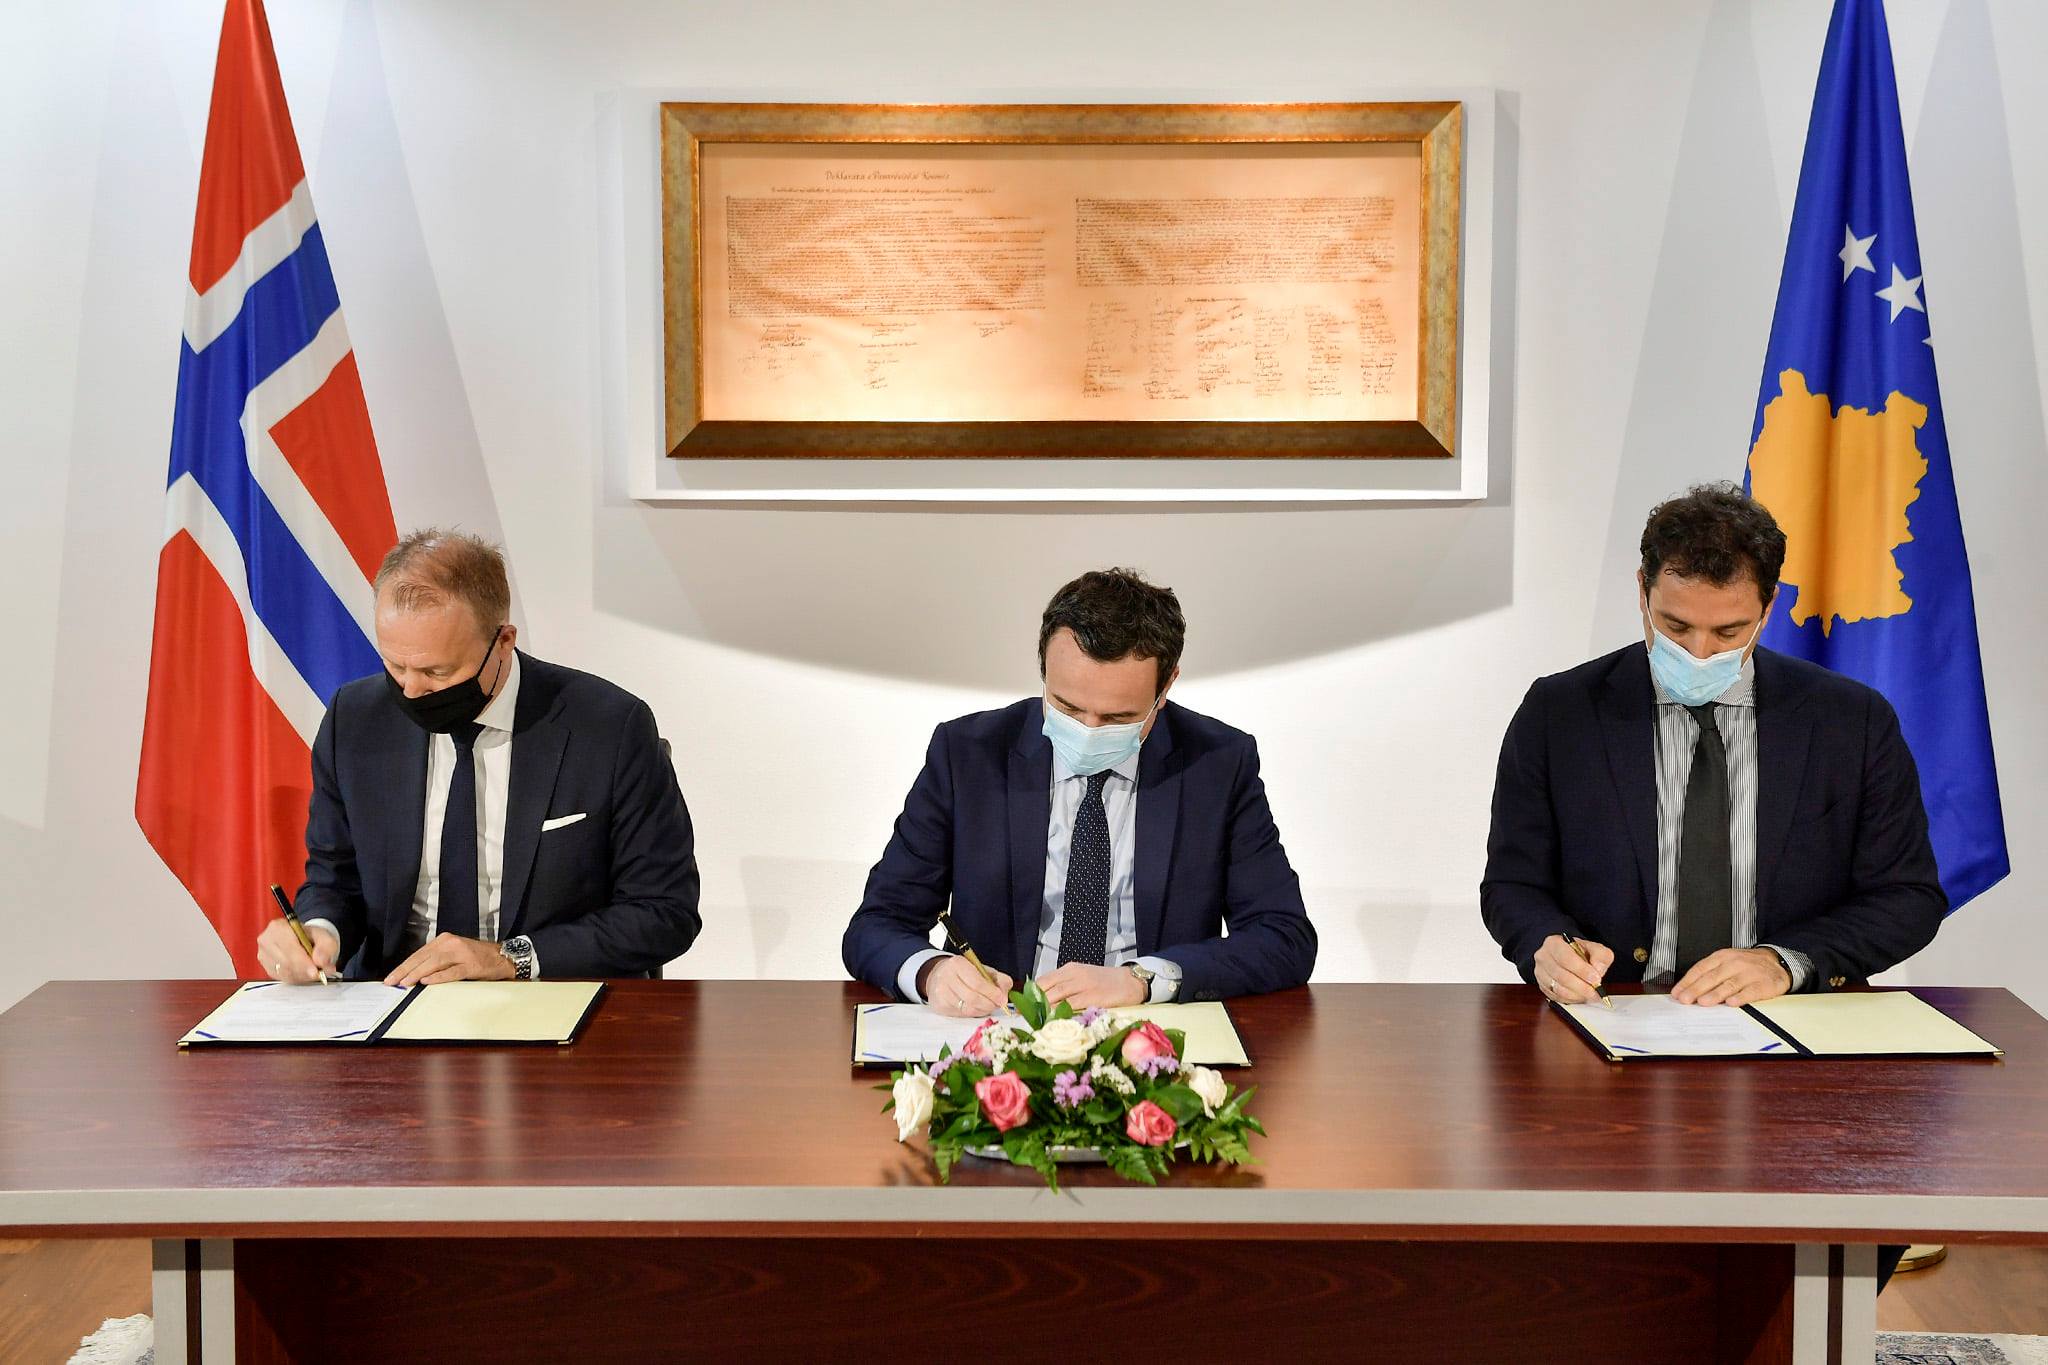 BPRG signed a Memorandum of Understanding with Government of Kosovo and the Royal Norwegian Embassy